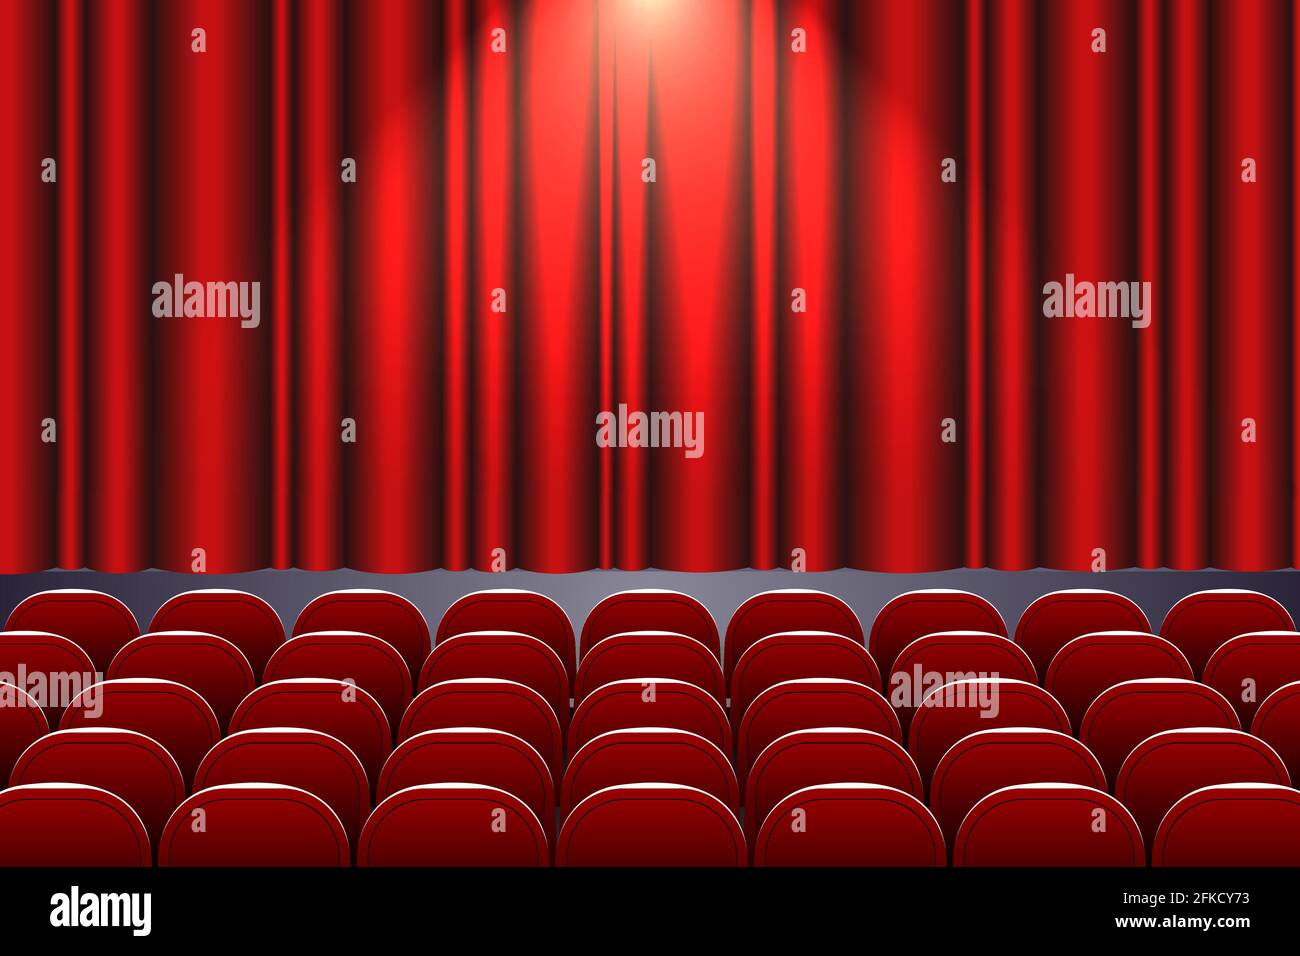 Theater auditorium with rows of red seats and stage with curtain ...